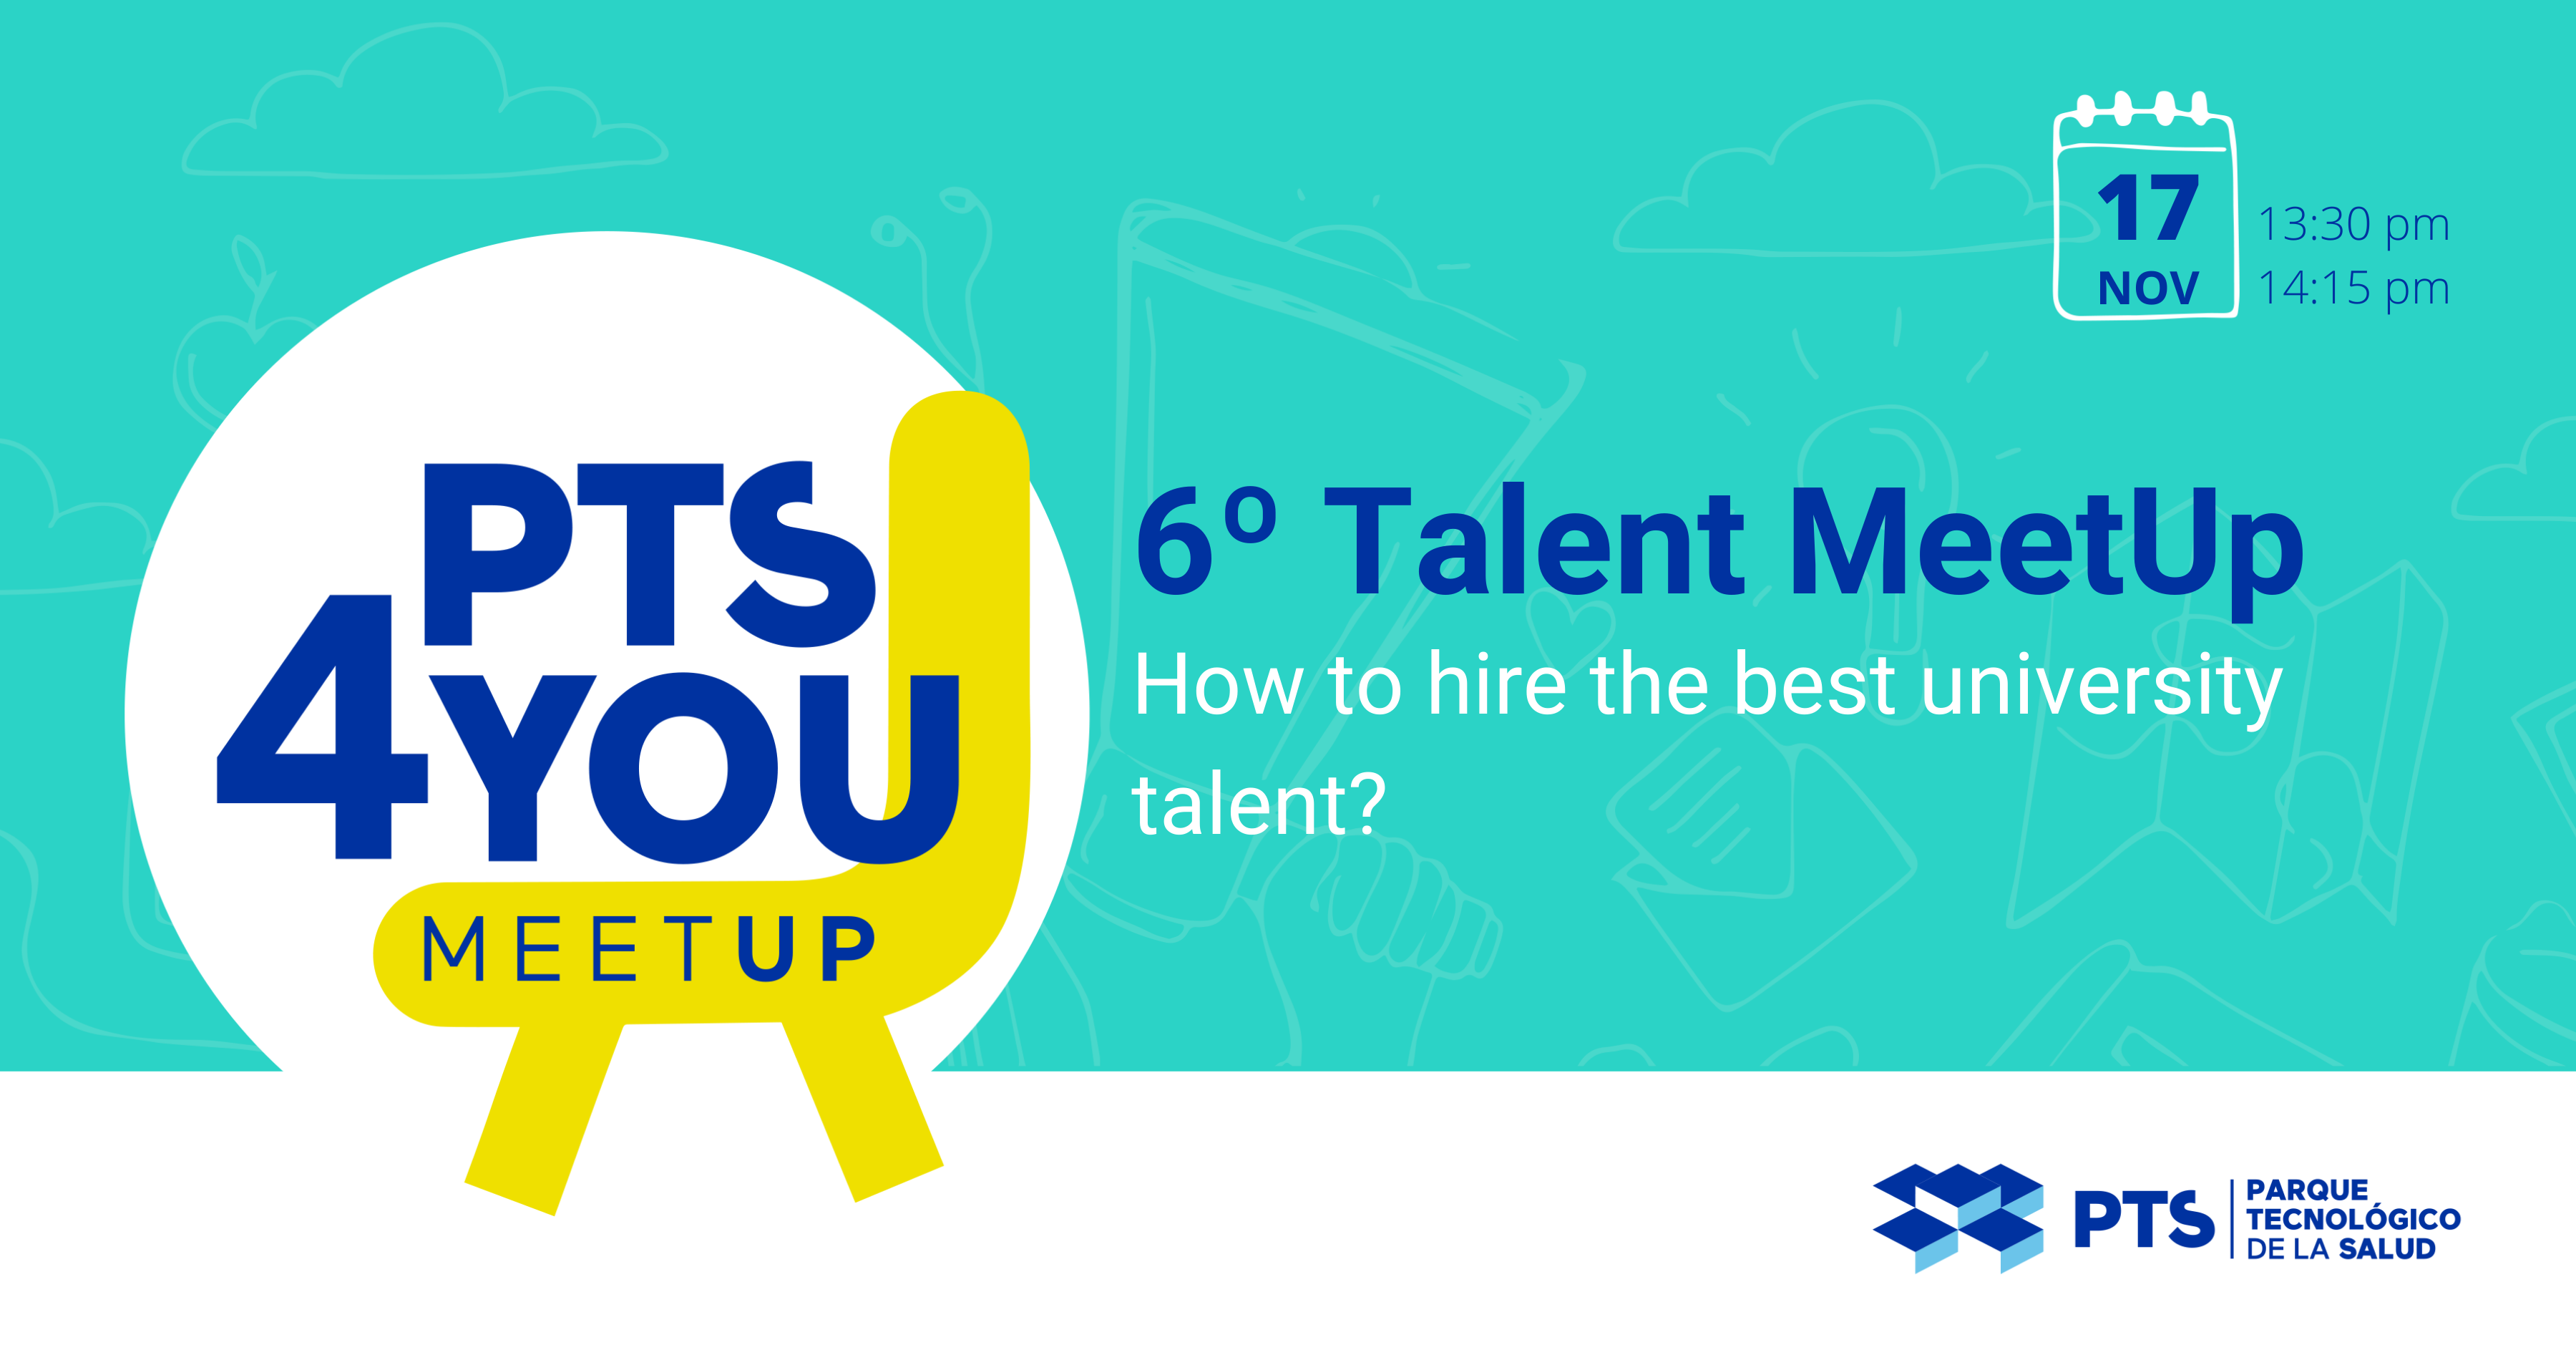 Featured image for “6th Talent MeetUp”